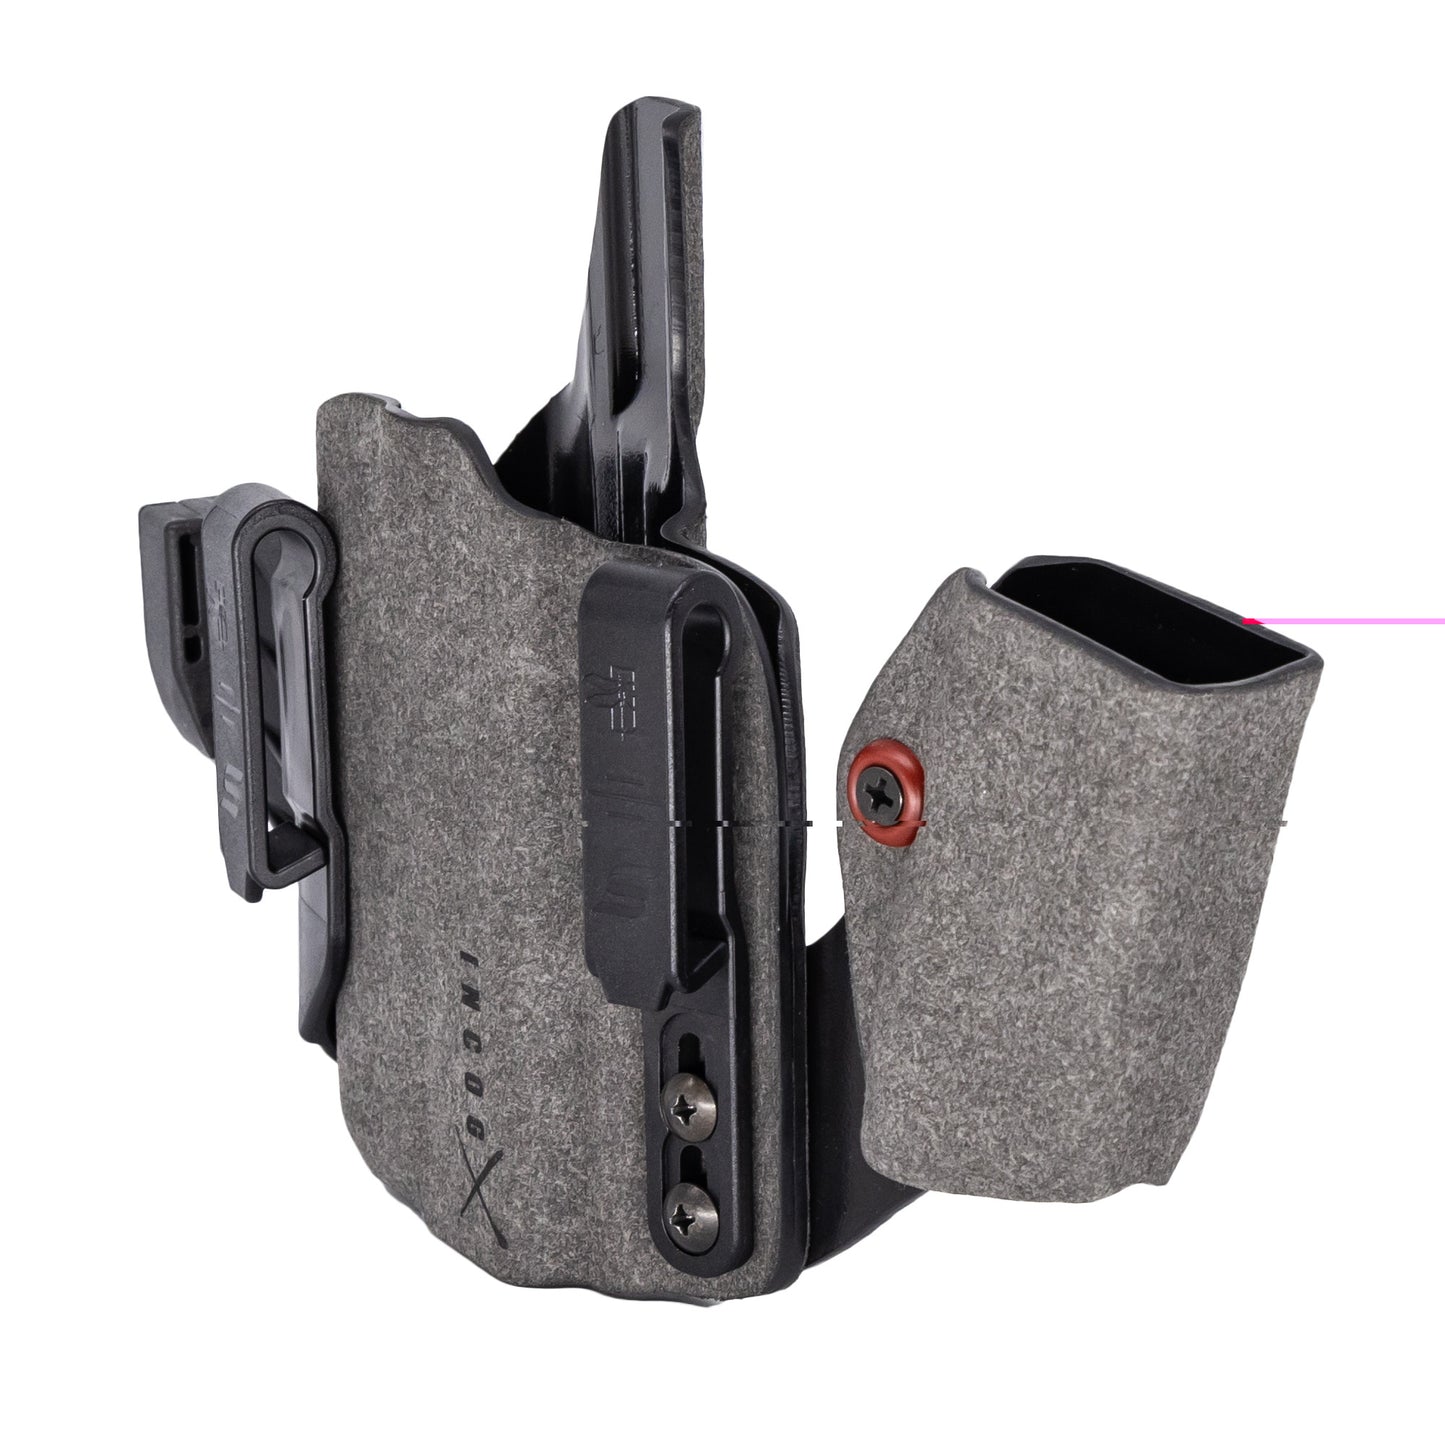 Safariland, INCOG, Joint Collaboration with Haley Strategic, Inside the Waistband Holster, For Glock 17/19, Integrated Magazine Caddy, Black, Right Hand